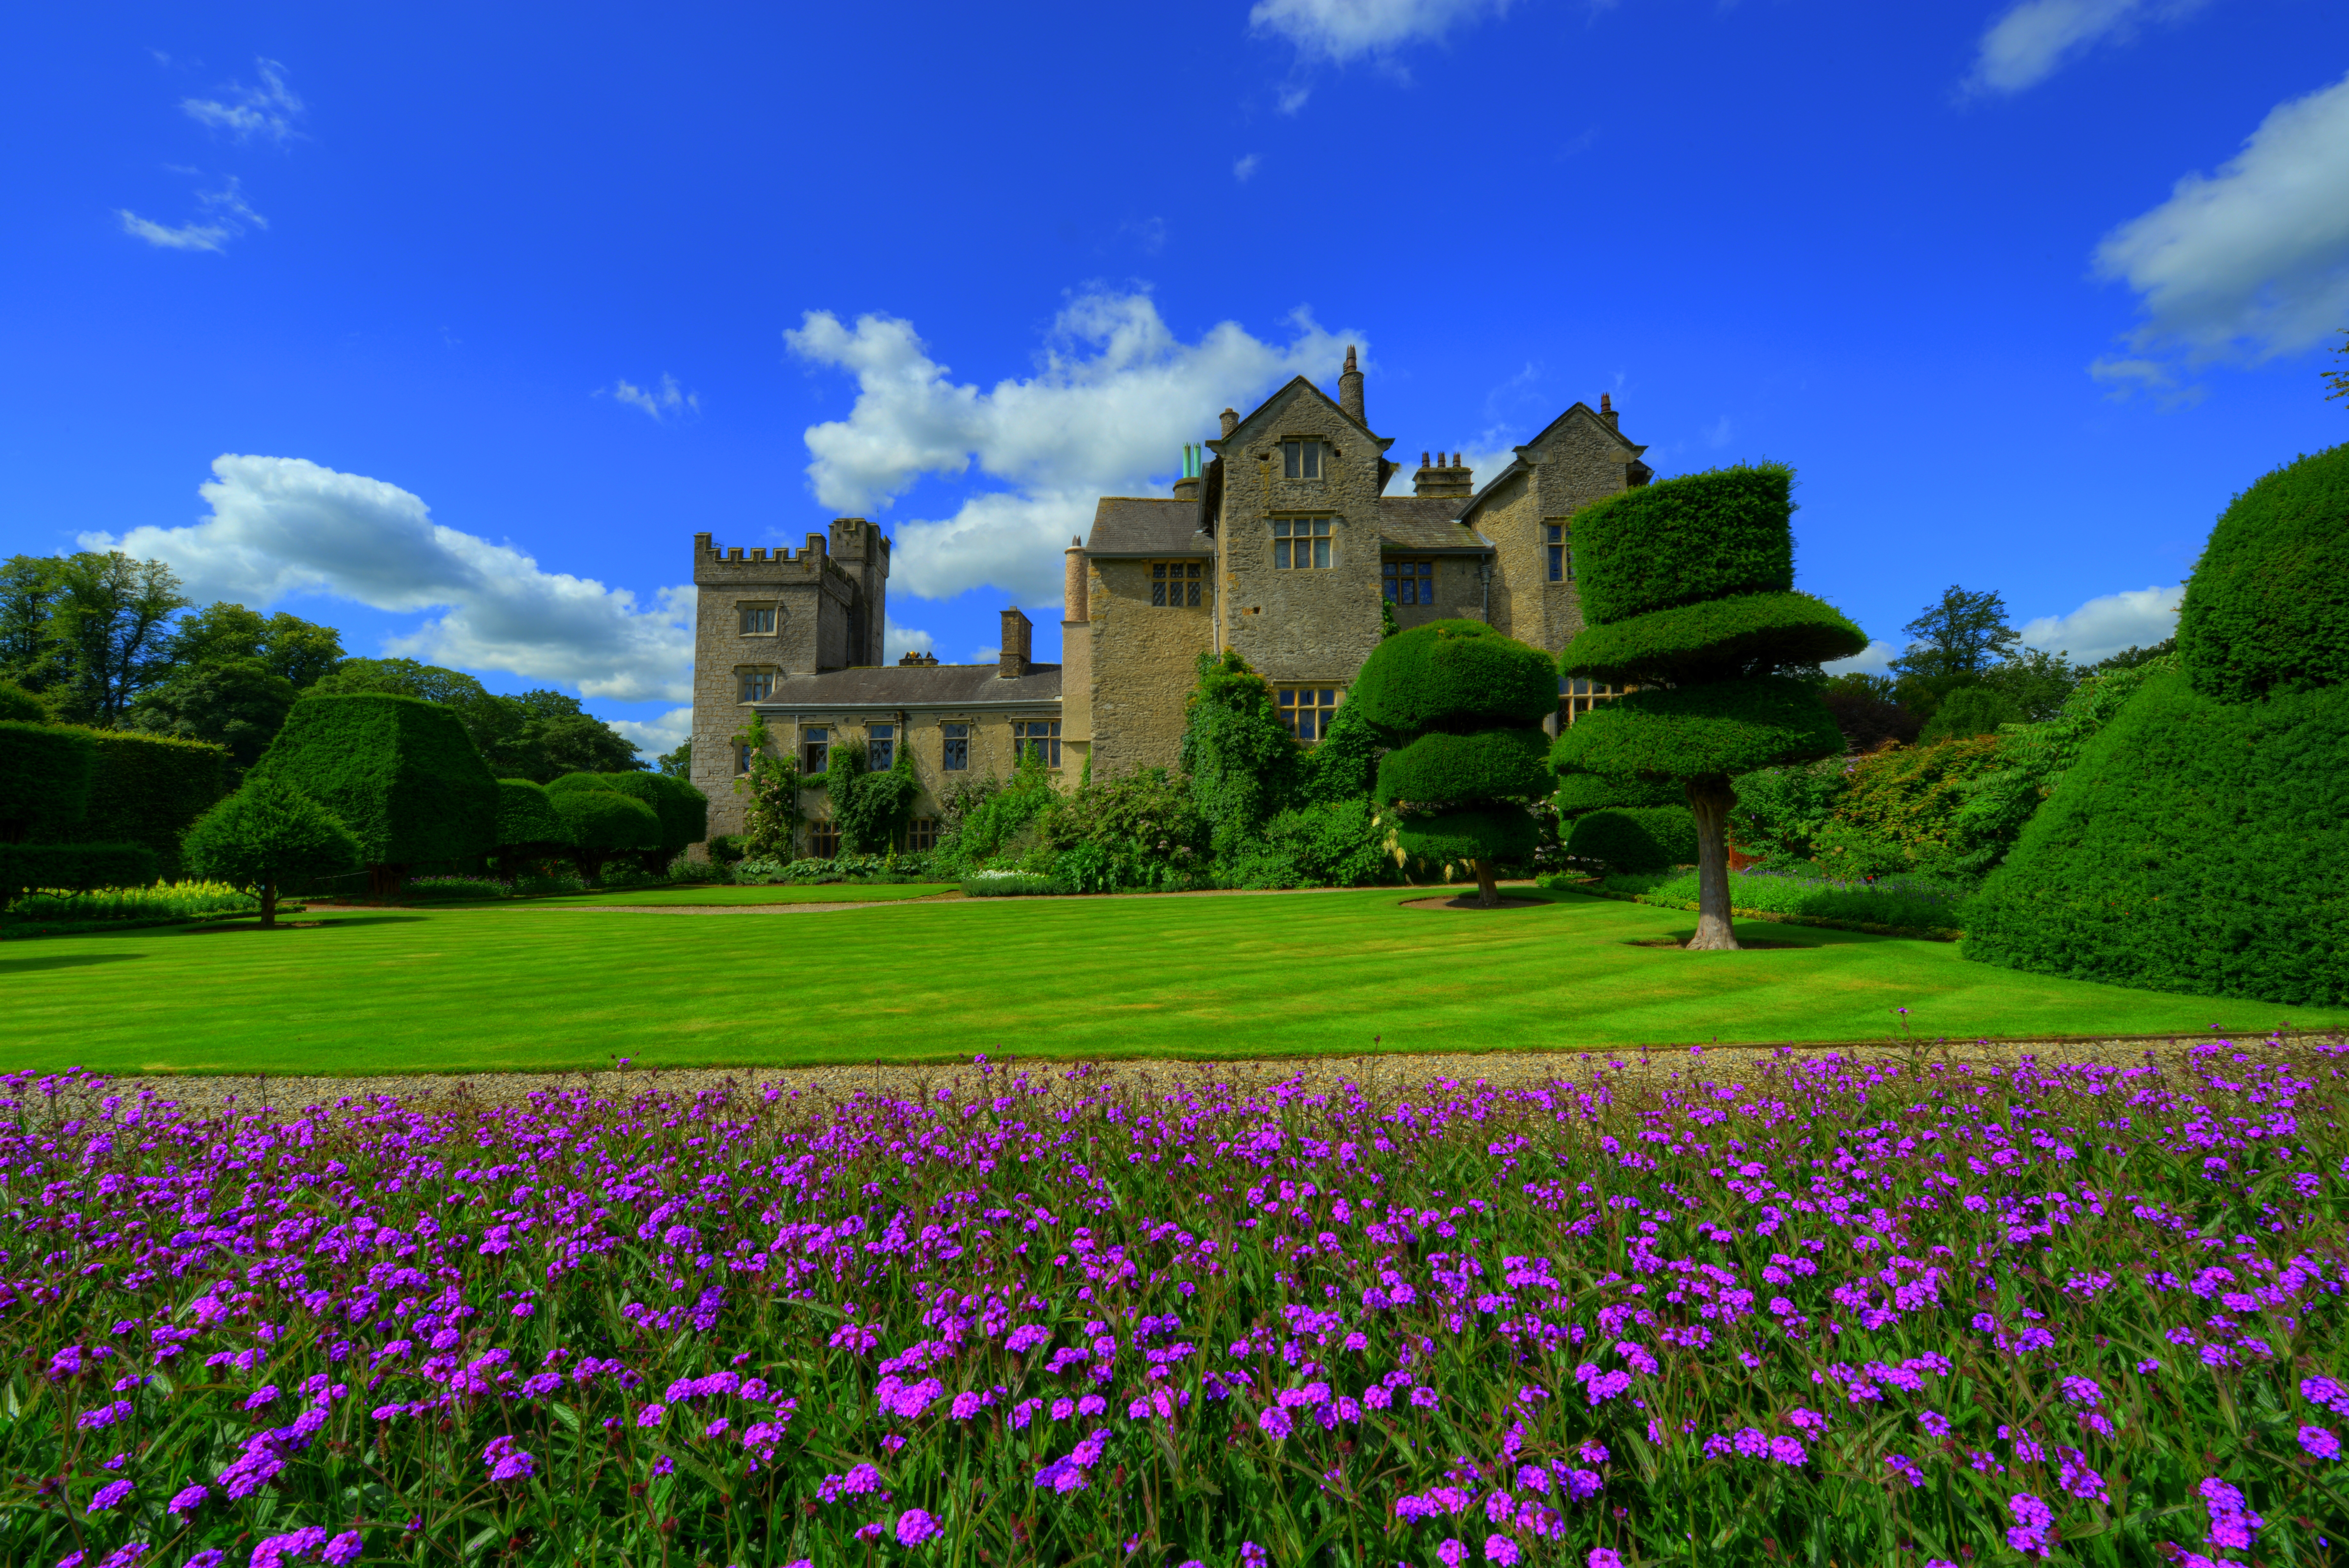 Wallpapers Garden Of Levens Hall England Cumbria on the desktop